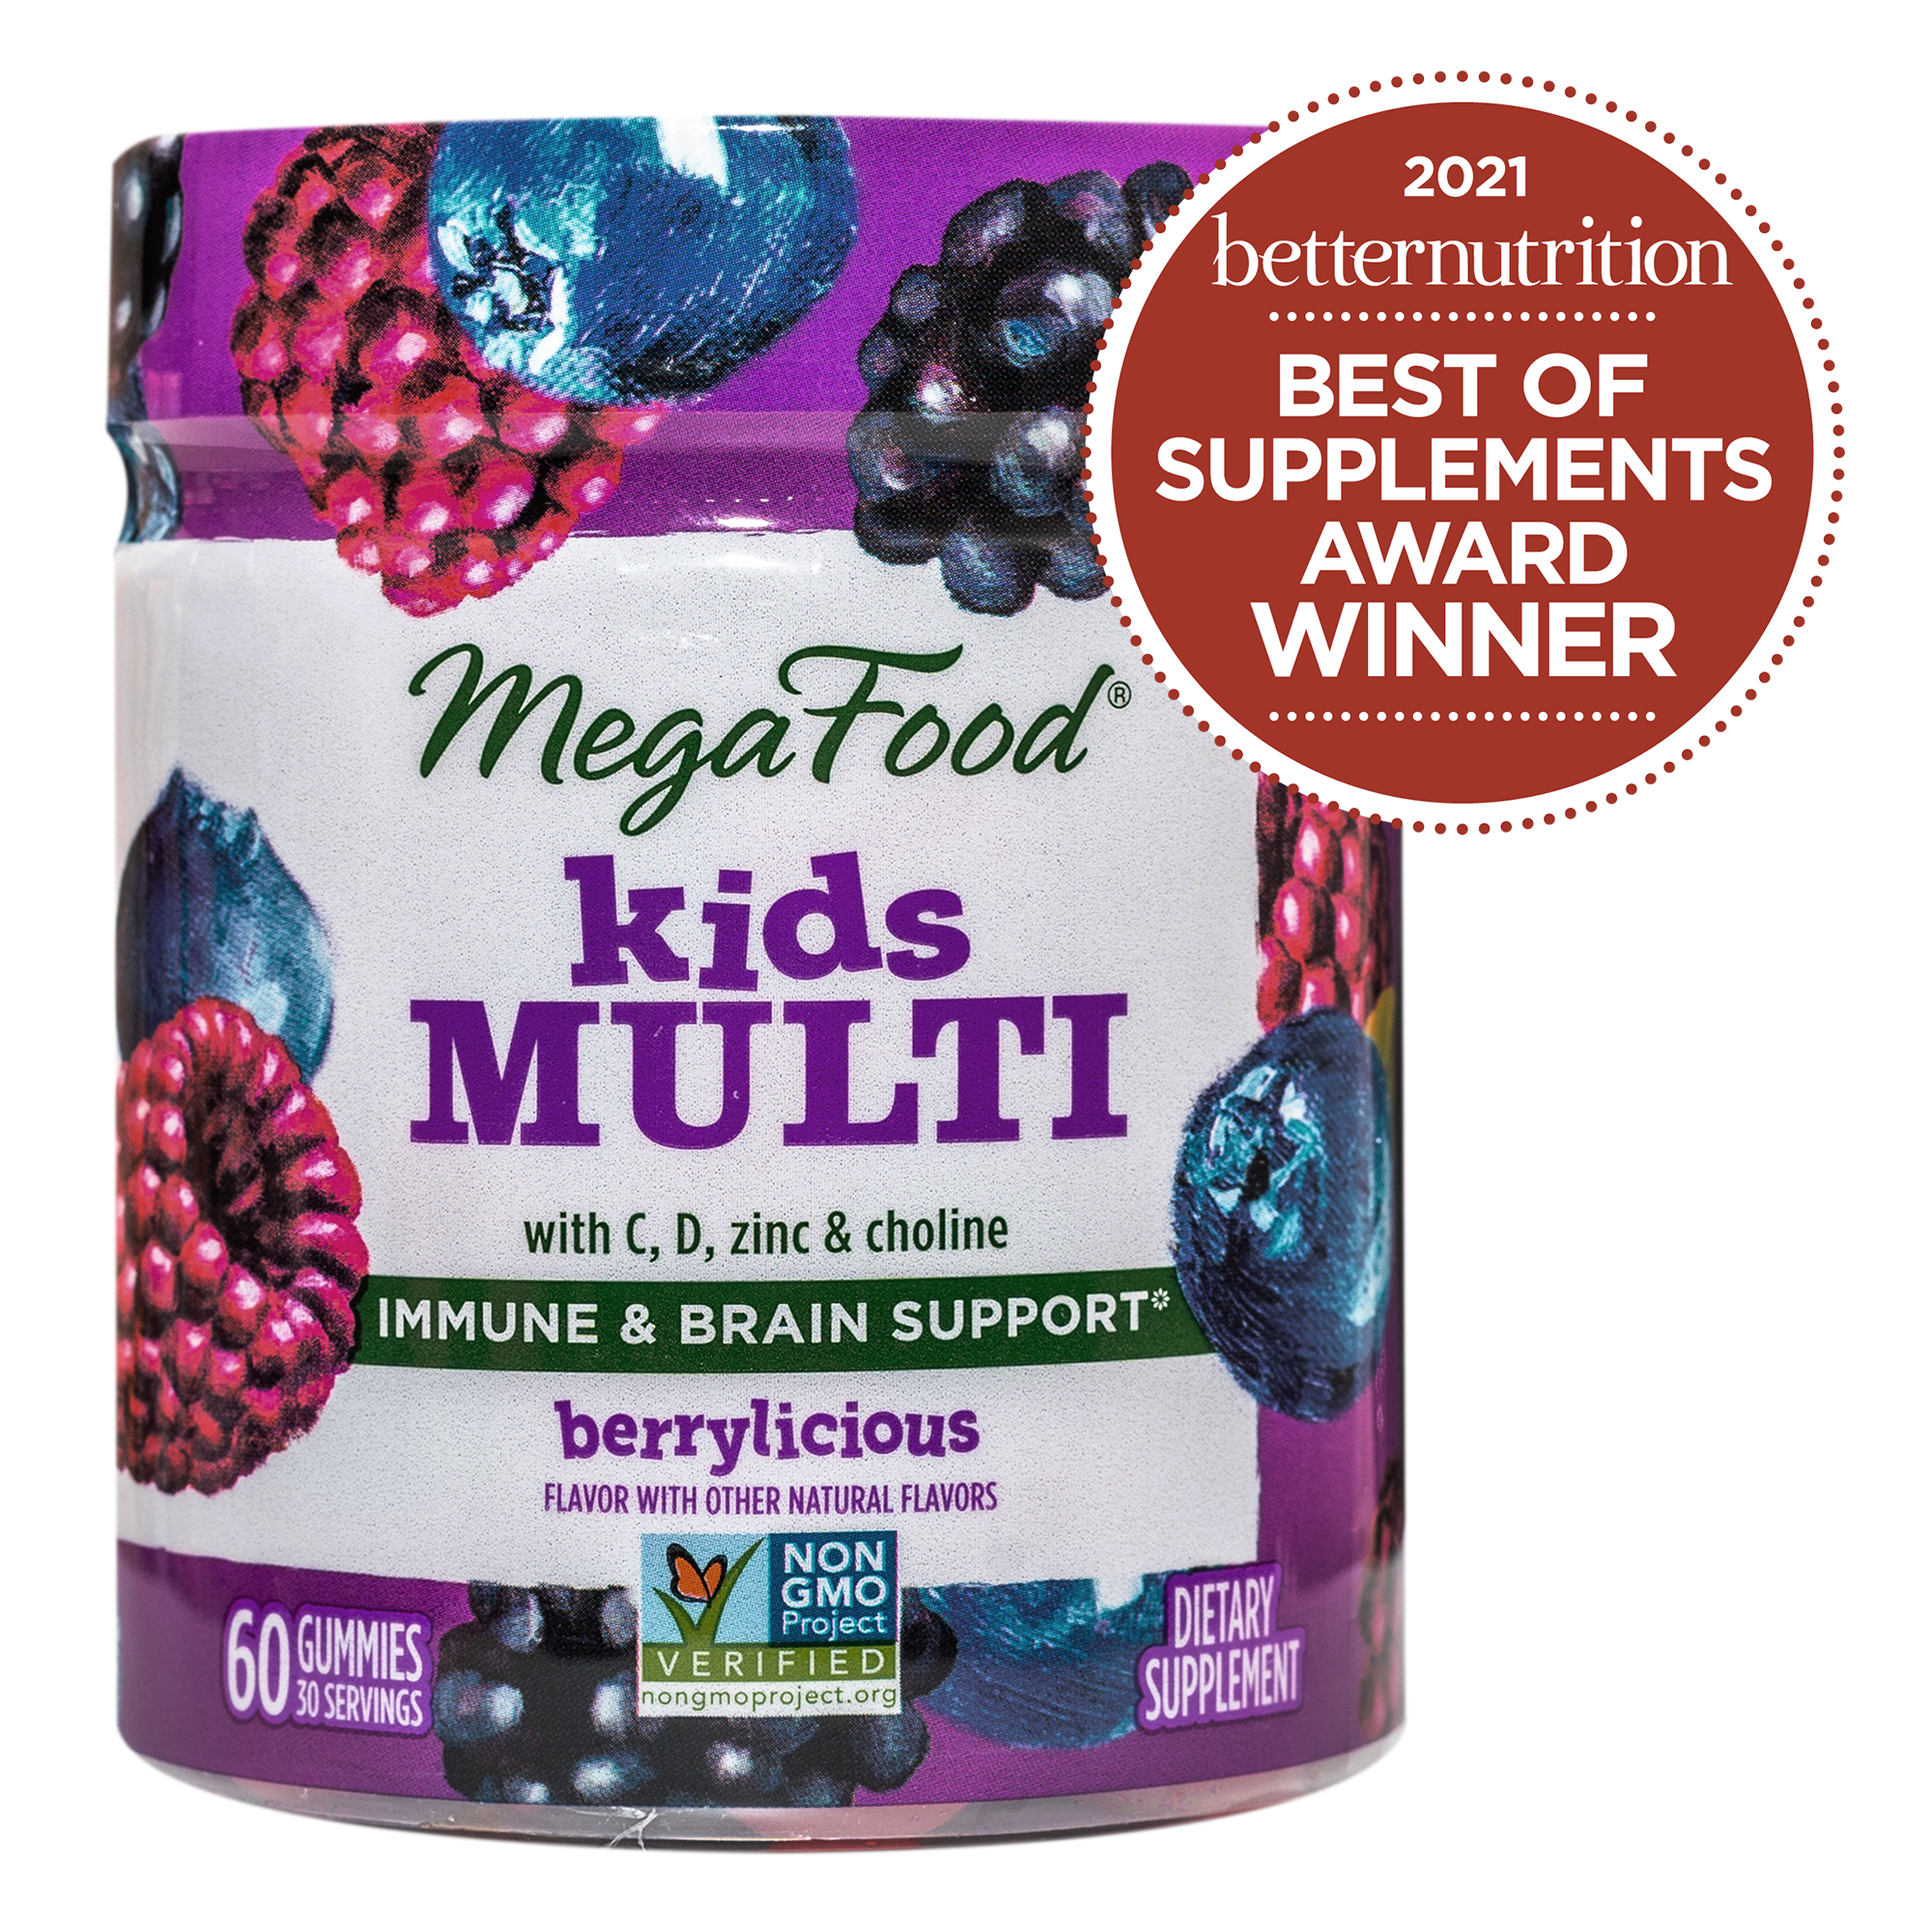 Kid's Multi Gummies have won the Better Nutrition Best of Supplements Awards for 2021